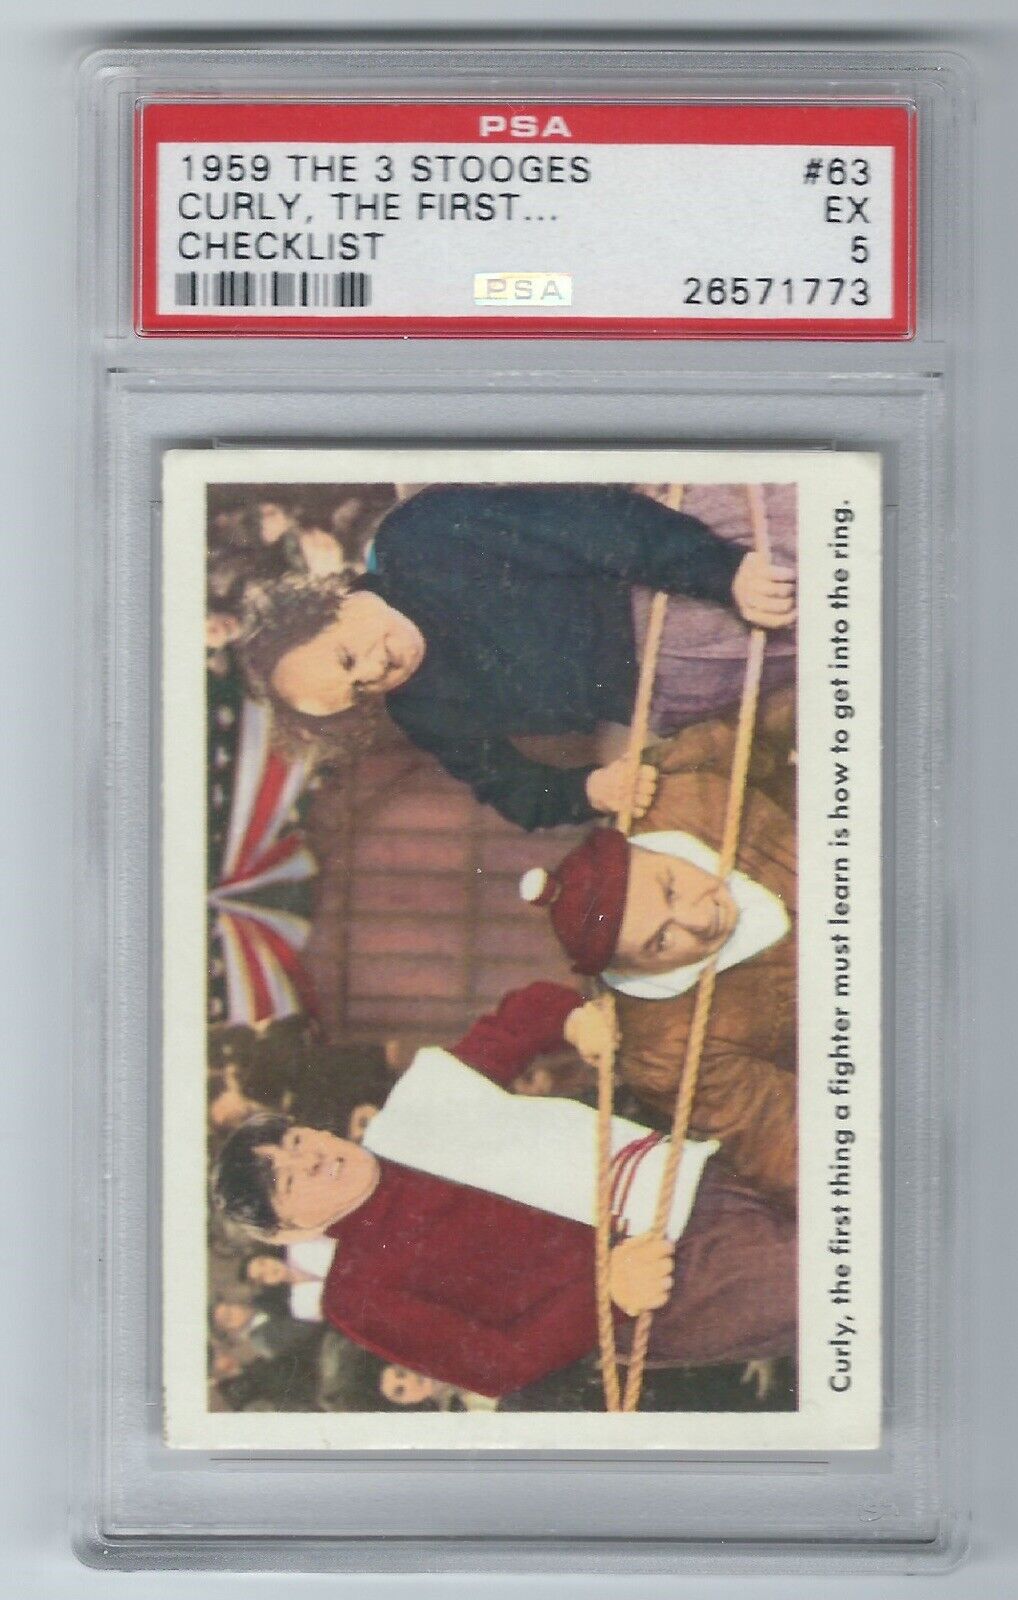 1959 Fleer The 3 Stooges Curly, The First… Checklist #63 PSA 5 No Qualifiers